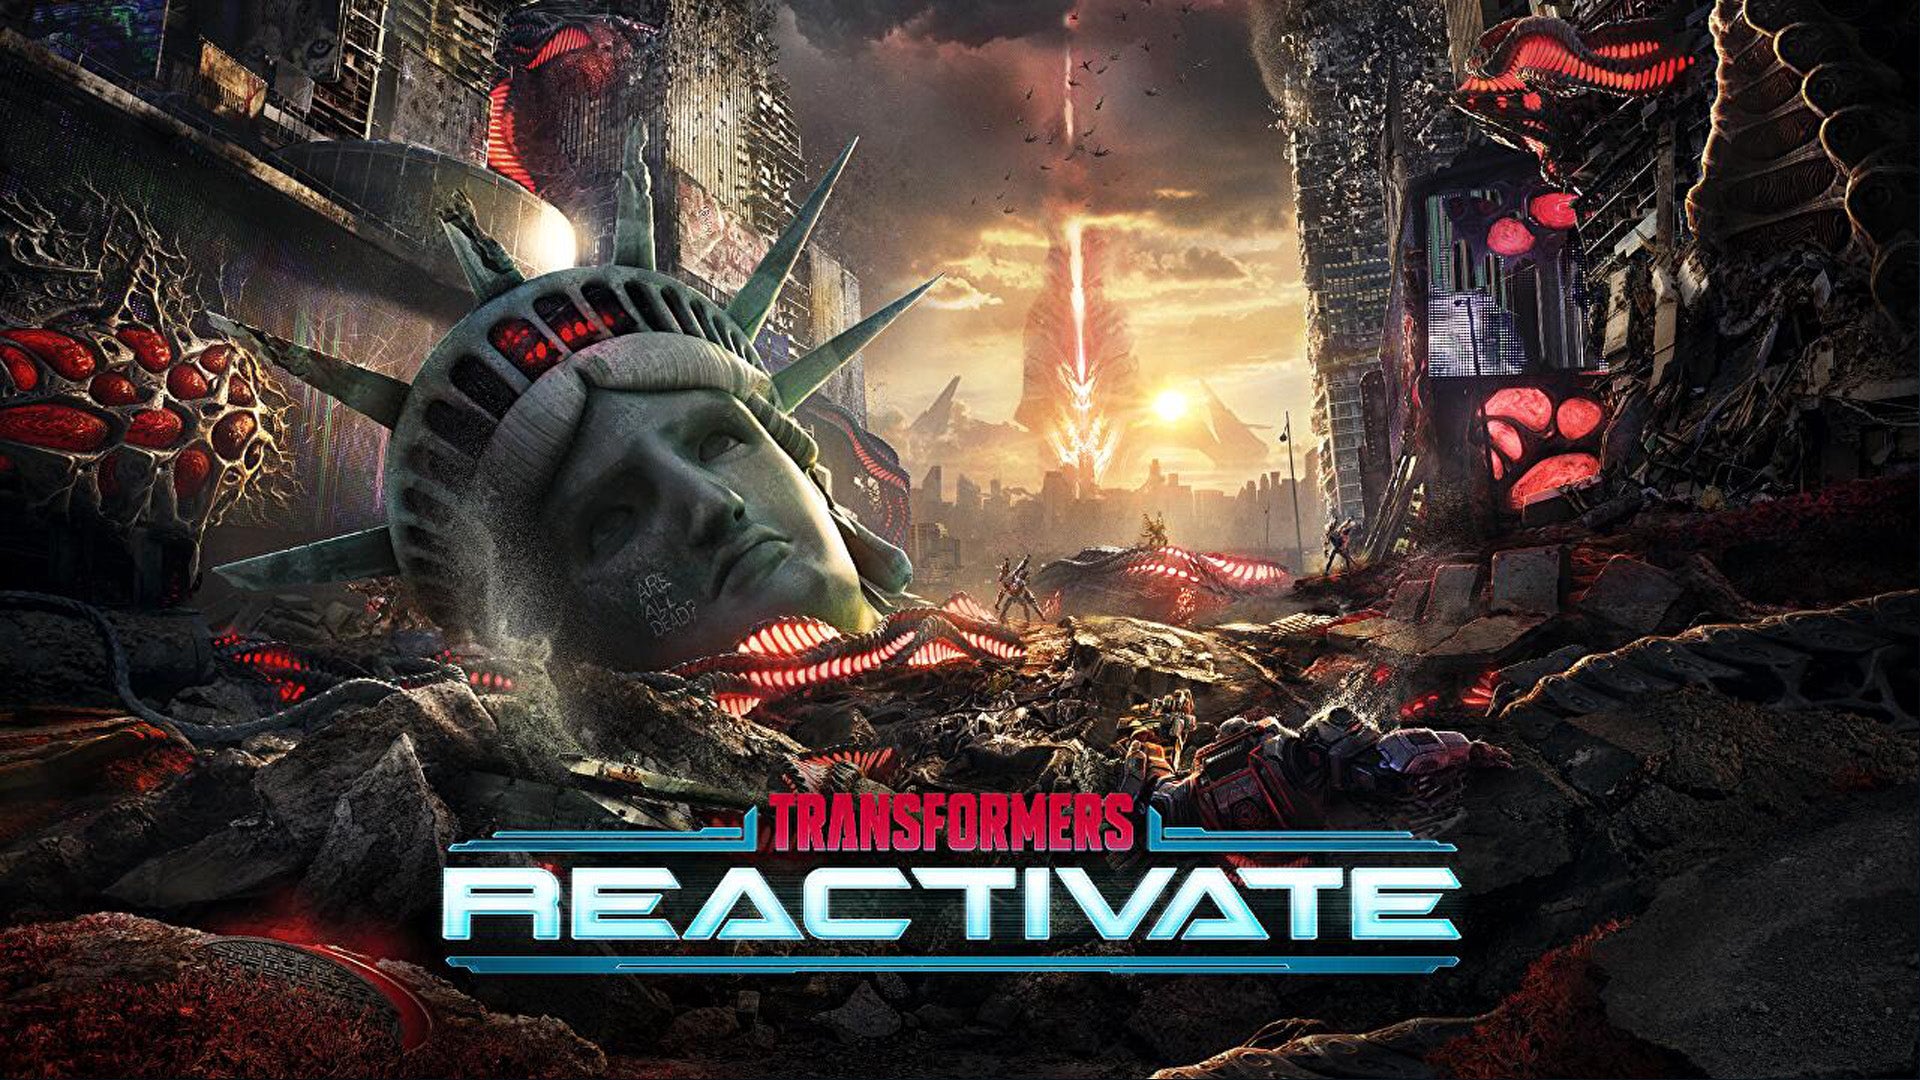 Transformers: Reactivate is a new online action game from the developers of Gears Tactics